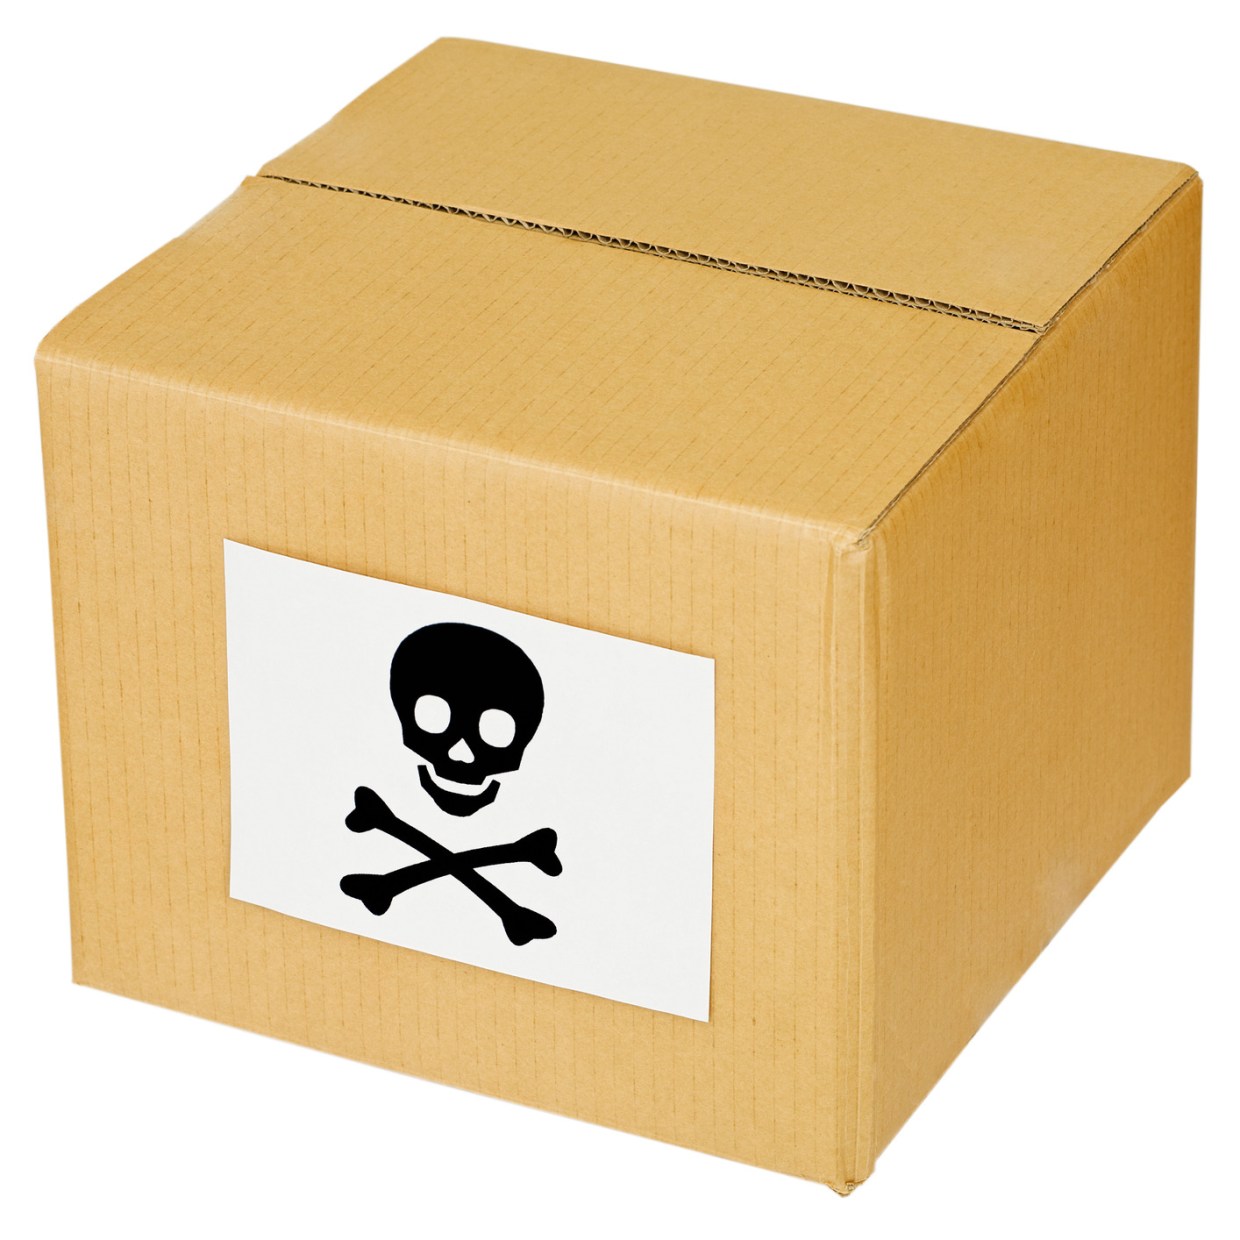 The PirateBox, Revisited